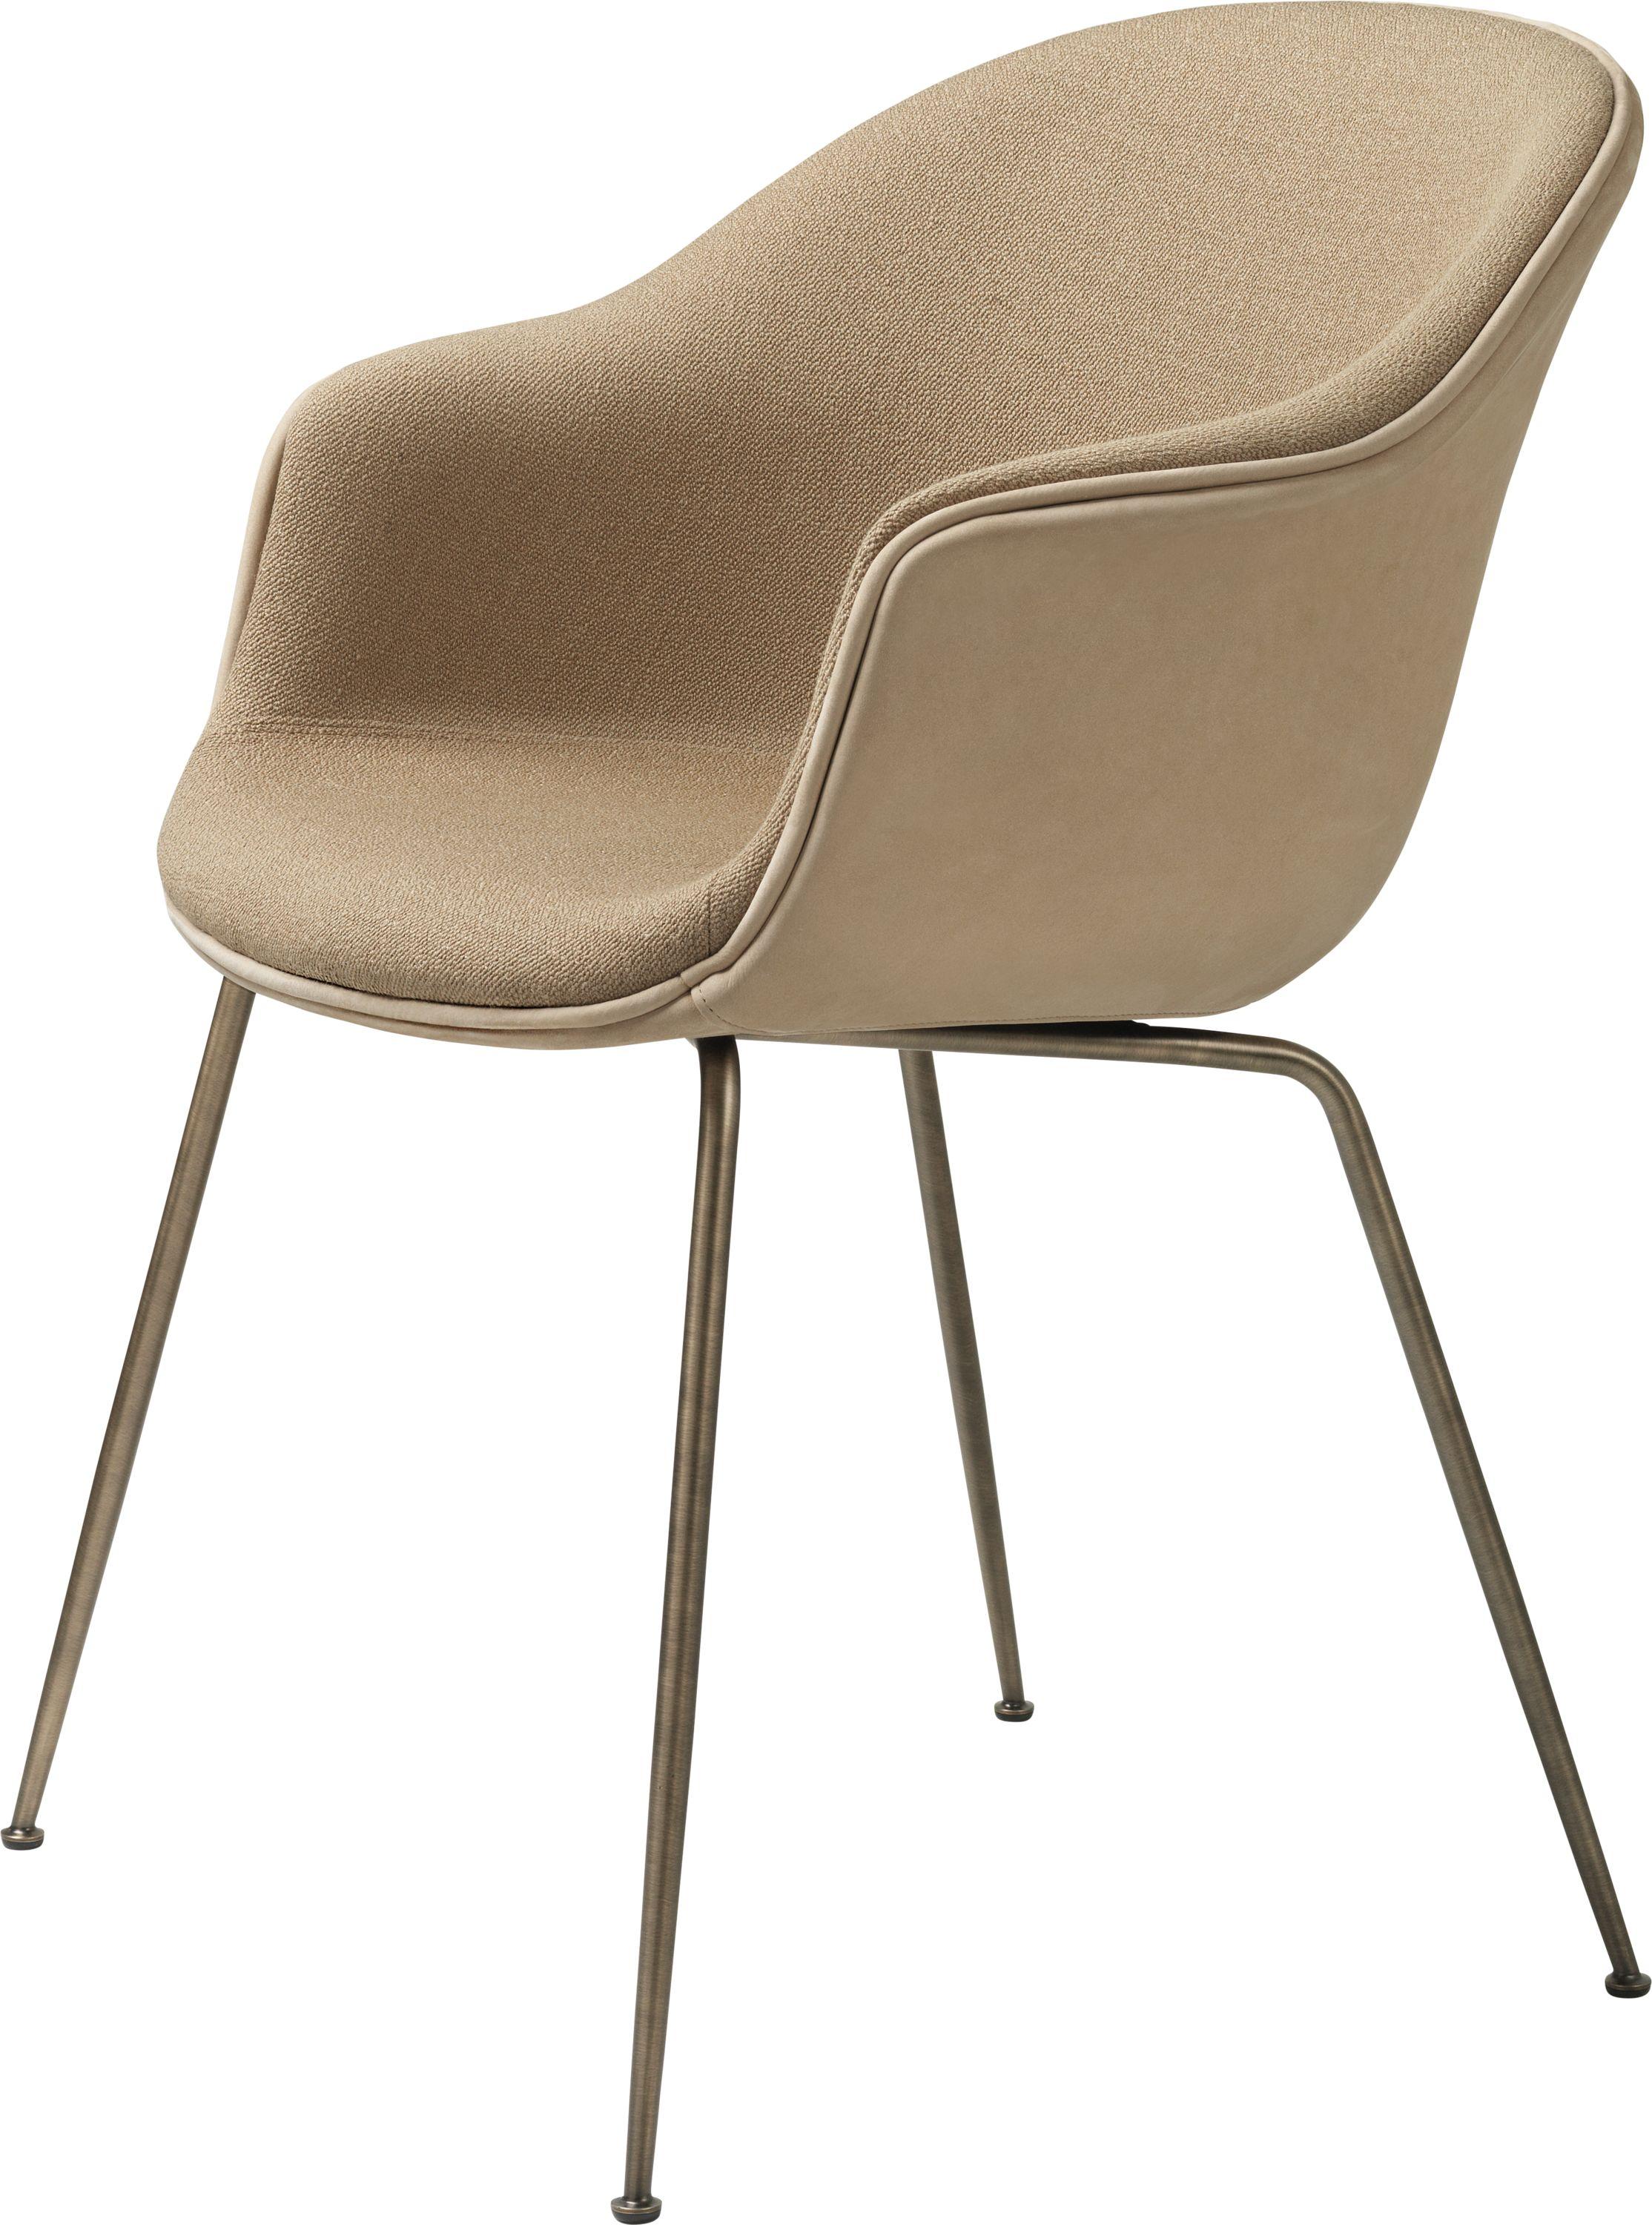 GamFratesi 'Bat' Dining Chair in Brown with Antique Brass Conic Base 7